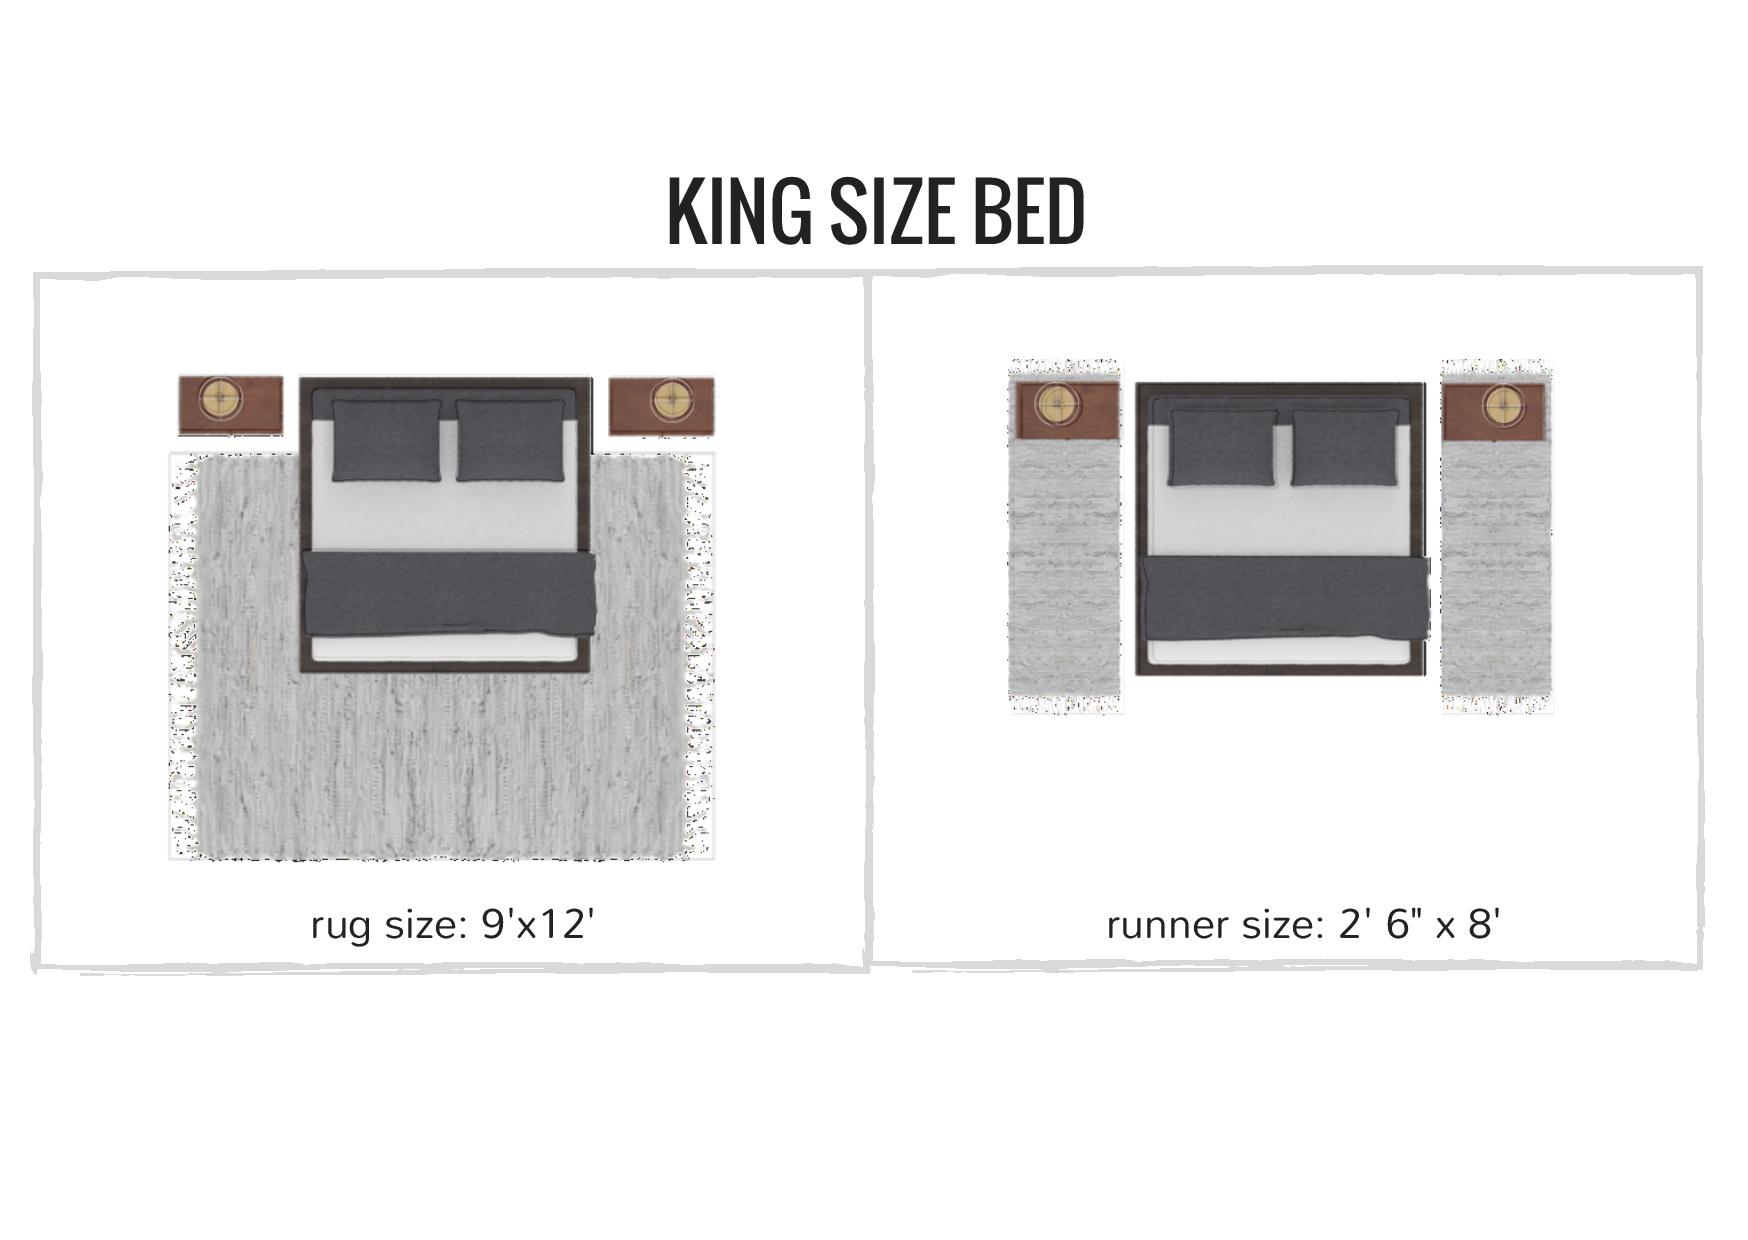 rug sizing and placement guide - what size rug do you need for your king size bed / bedroom